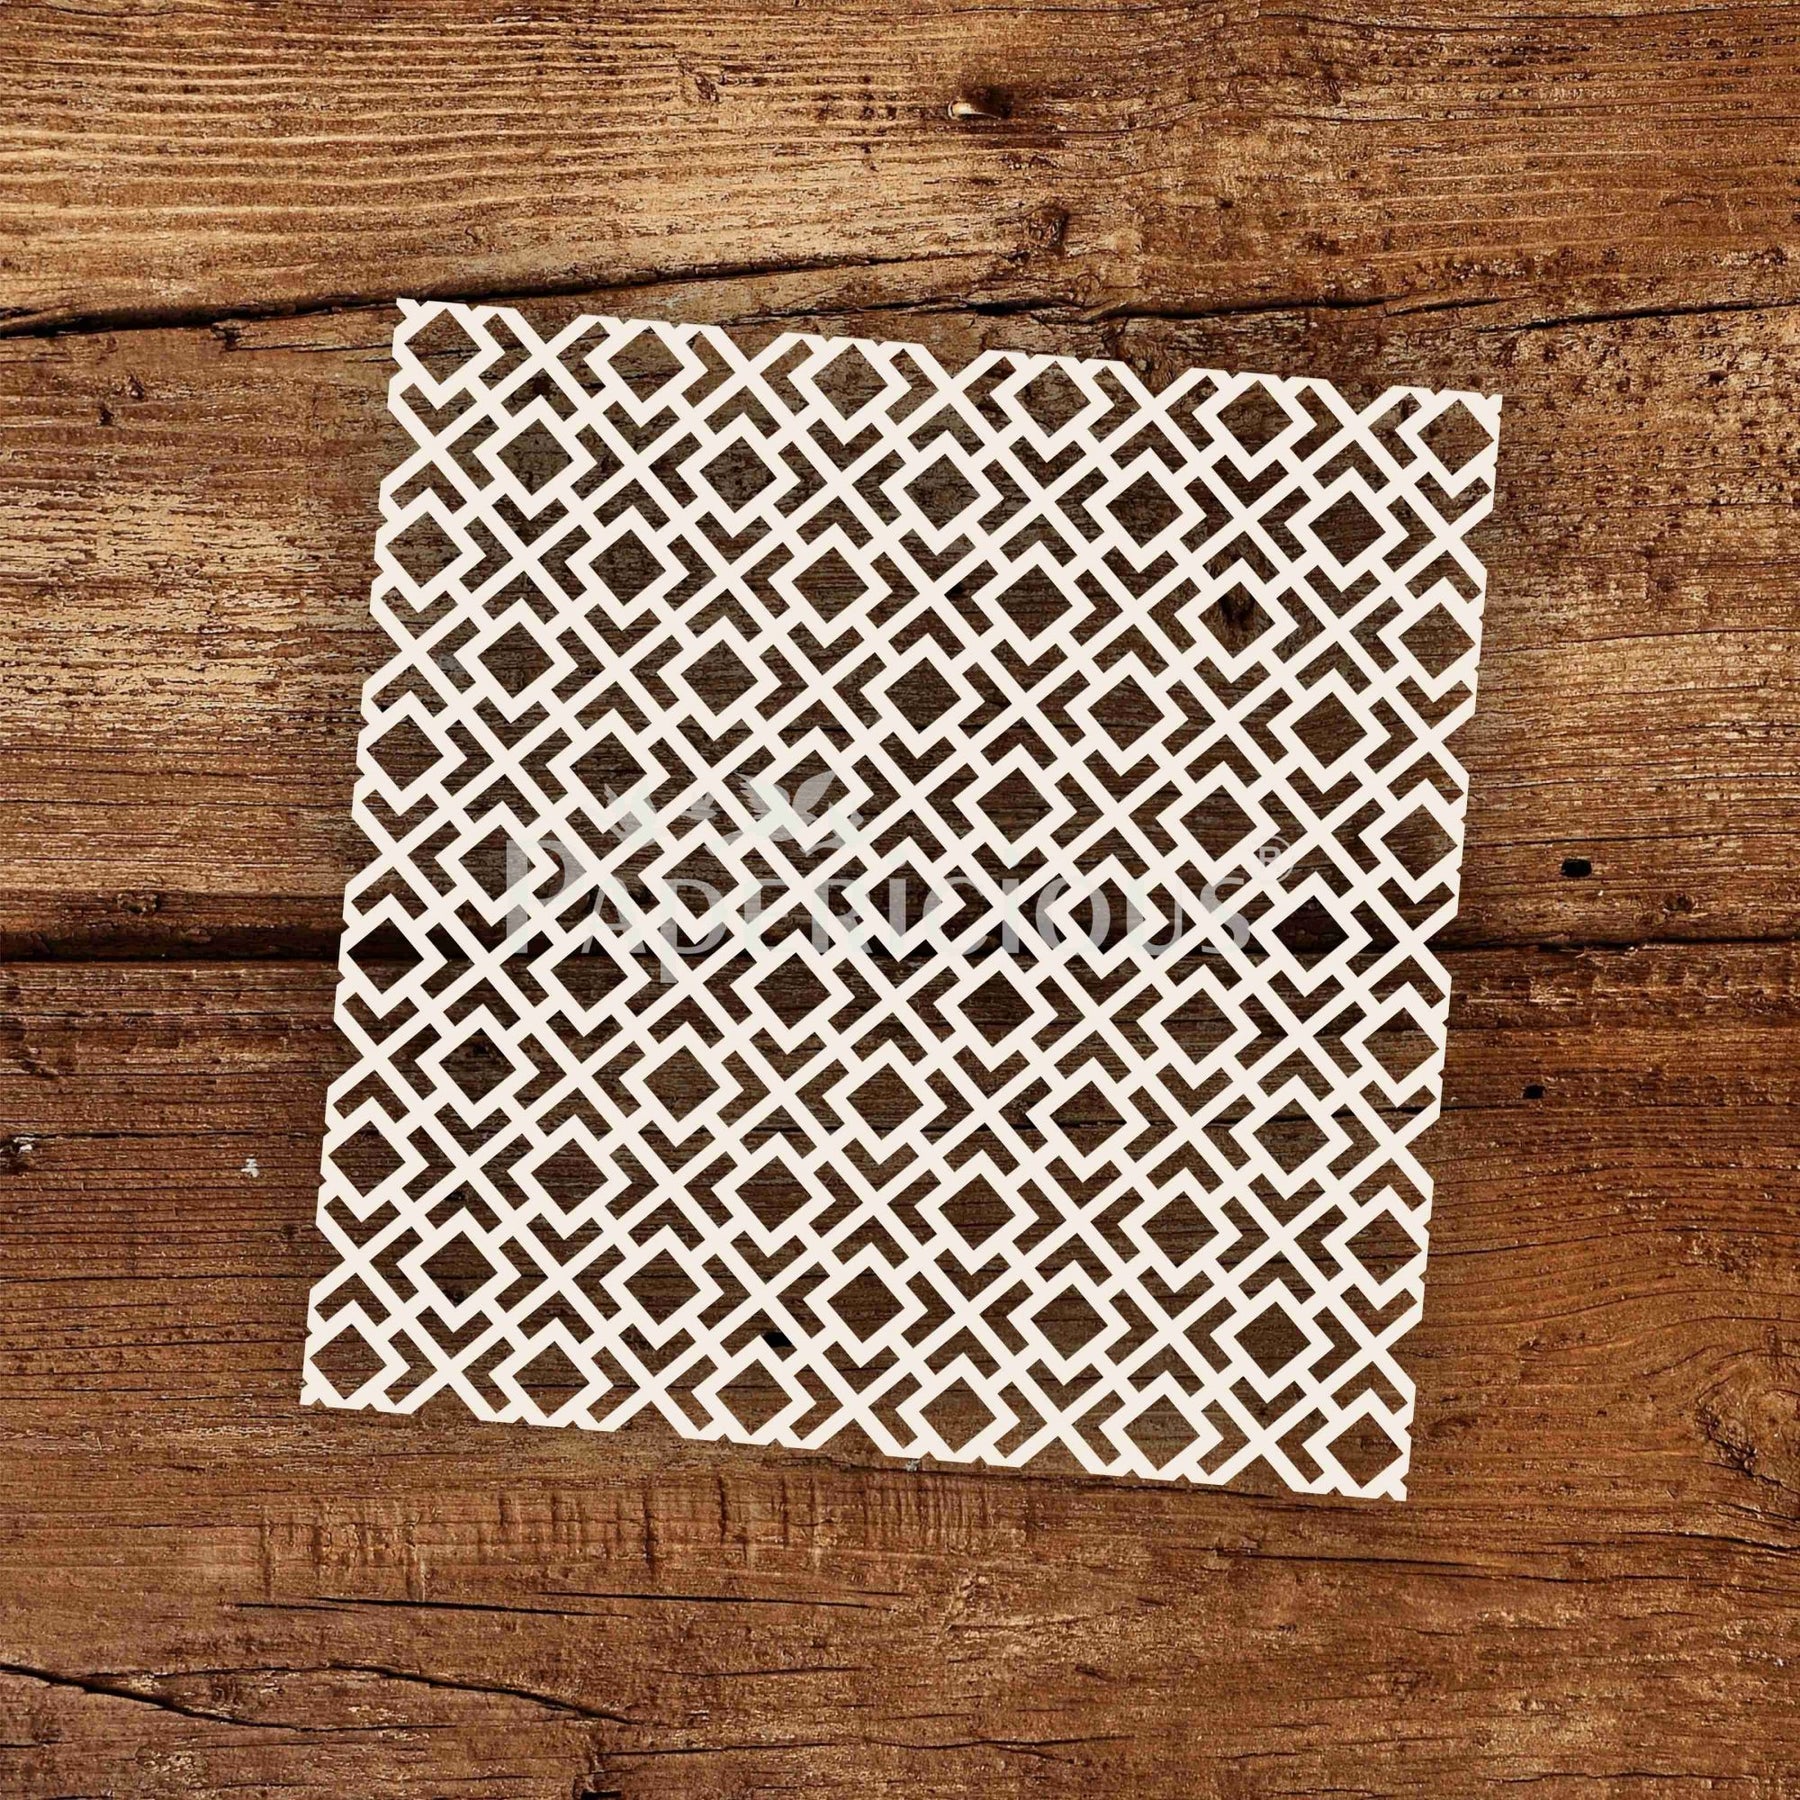 Scalable - 6x6 Inch Laser Cut Pattern Chippis